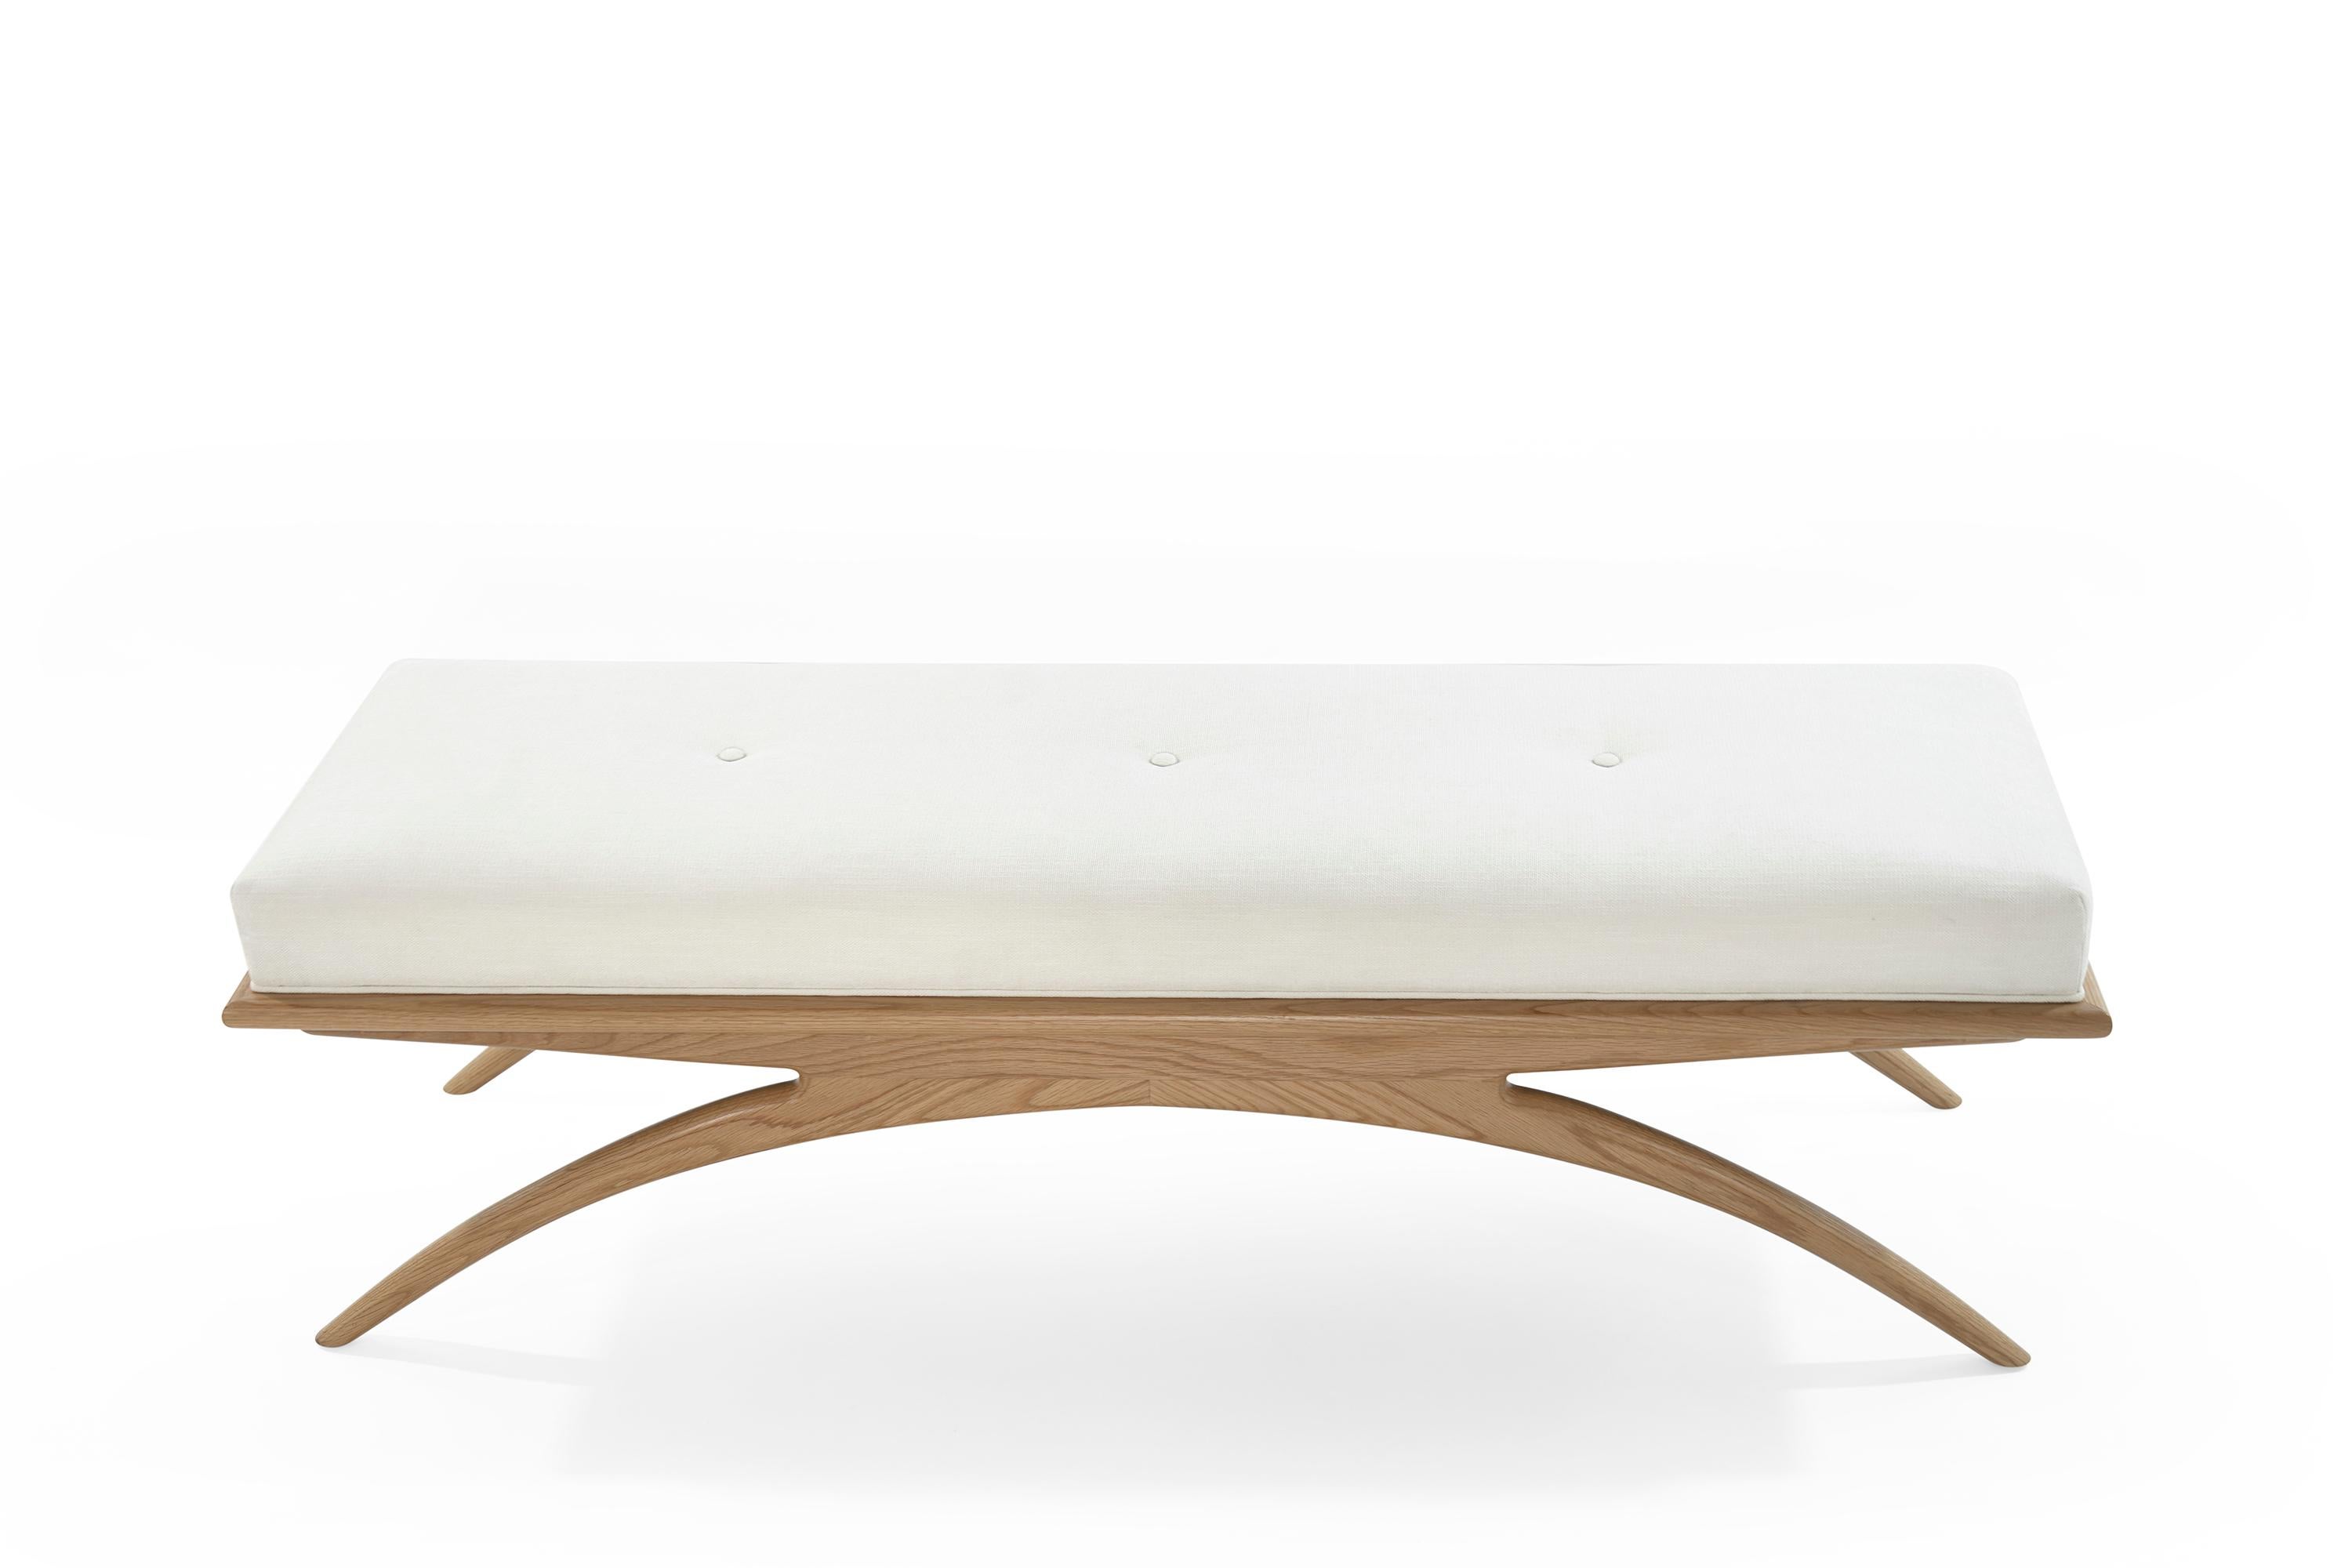 American Natural Oak Convex Bench by Stamford Modern